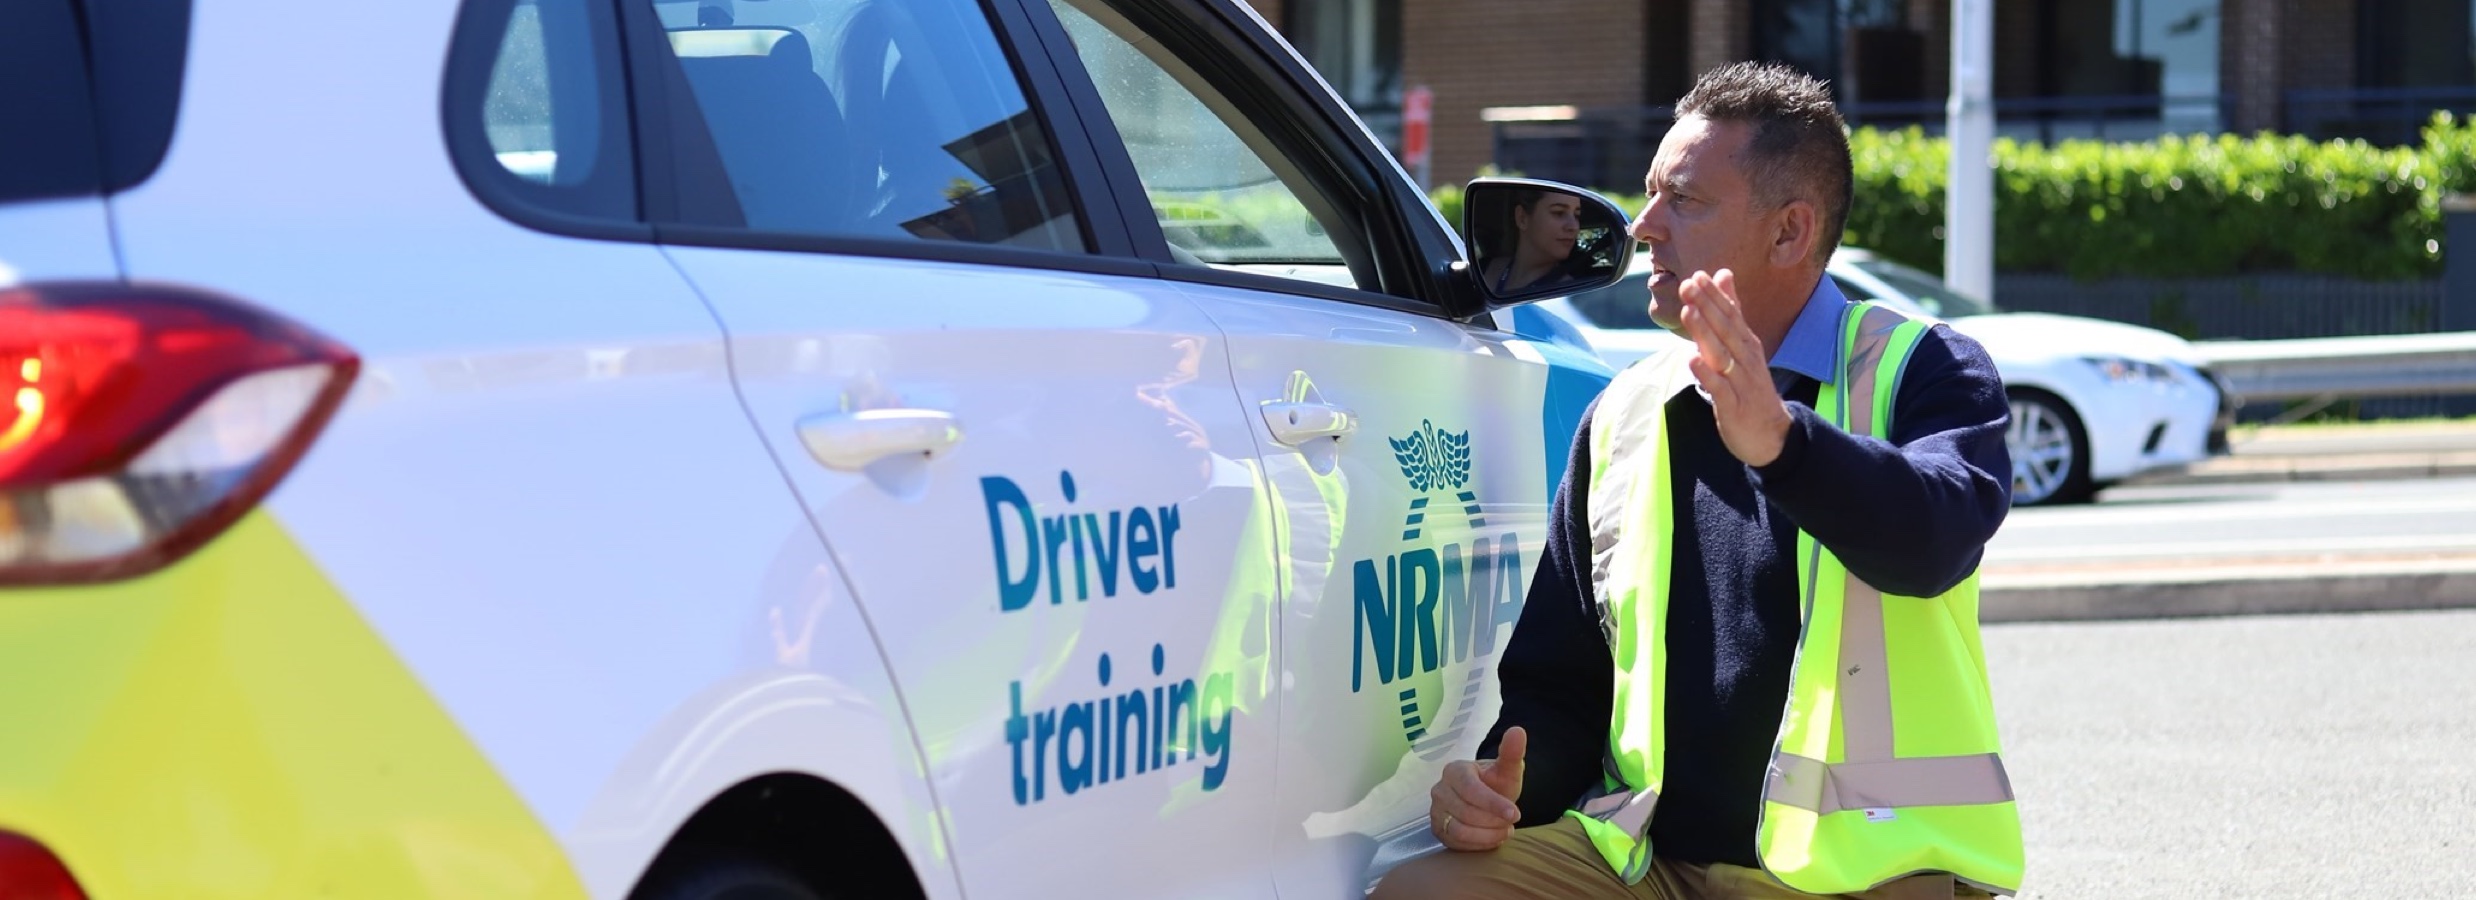 Business driver training